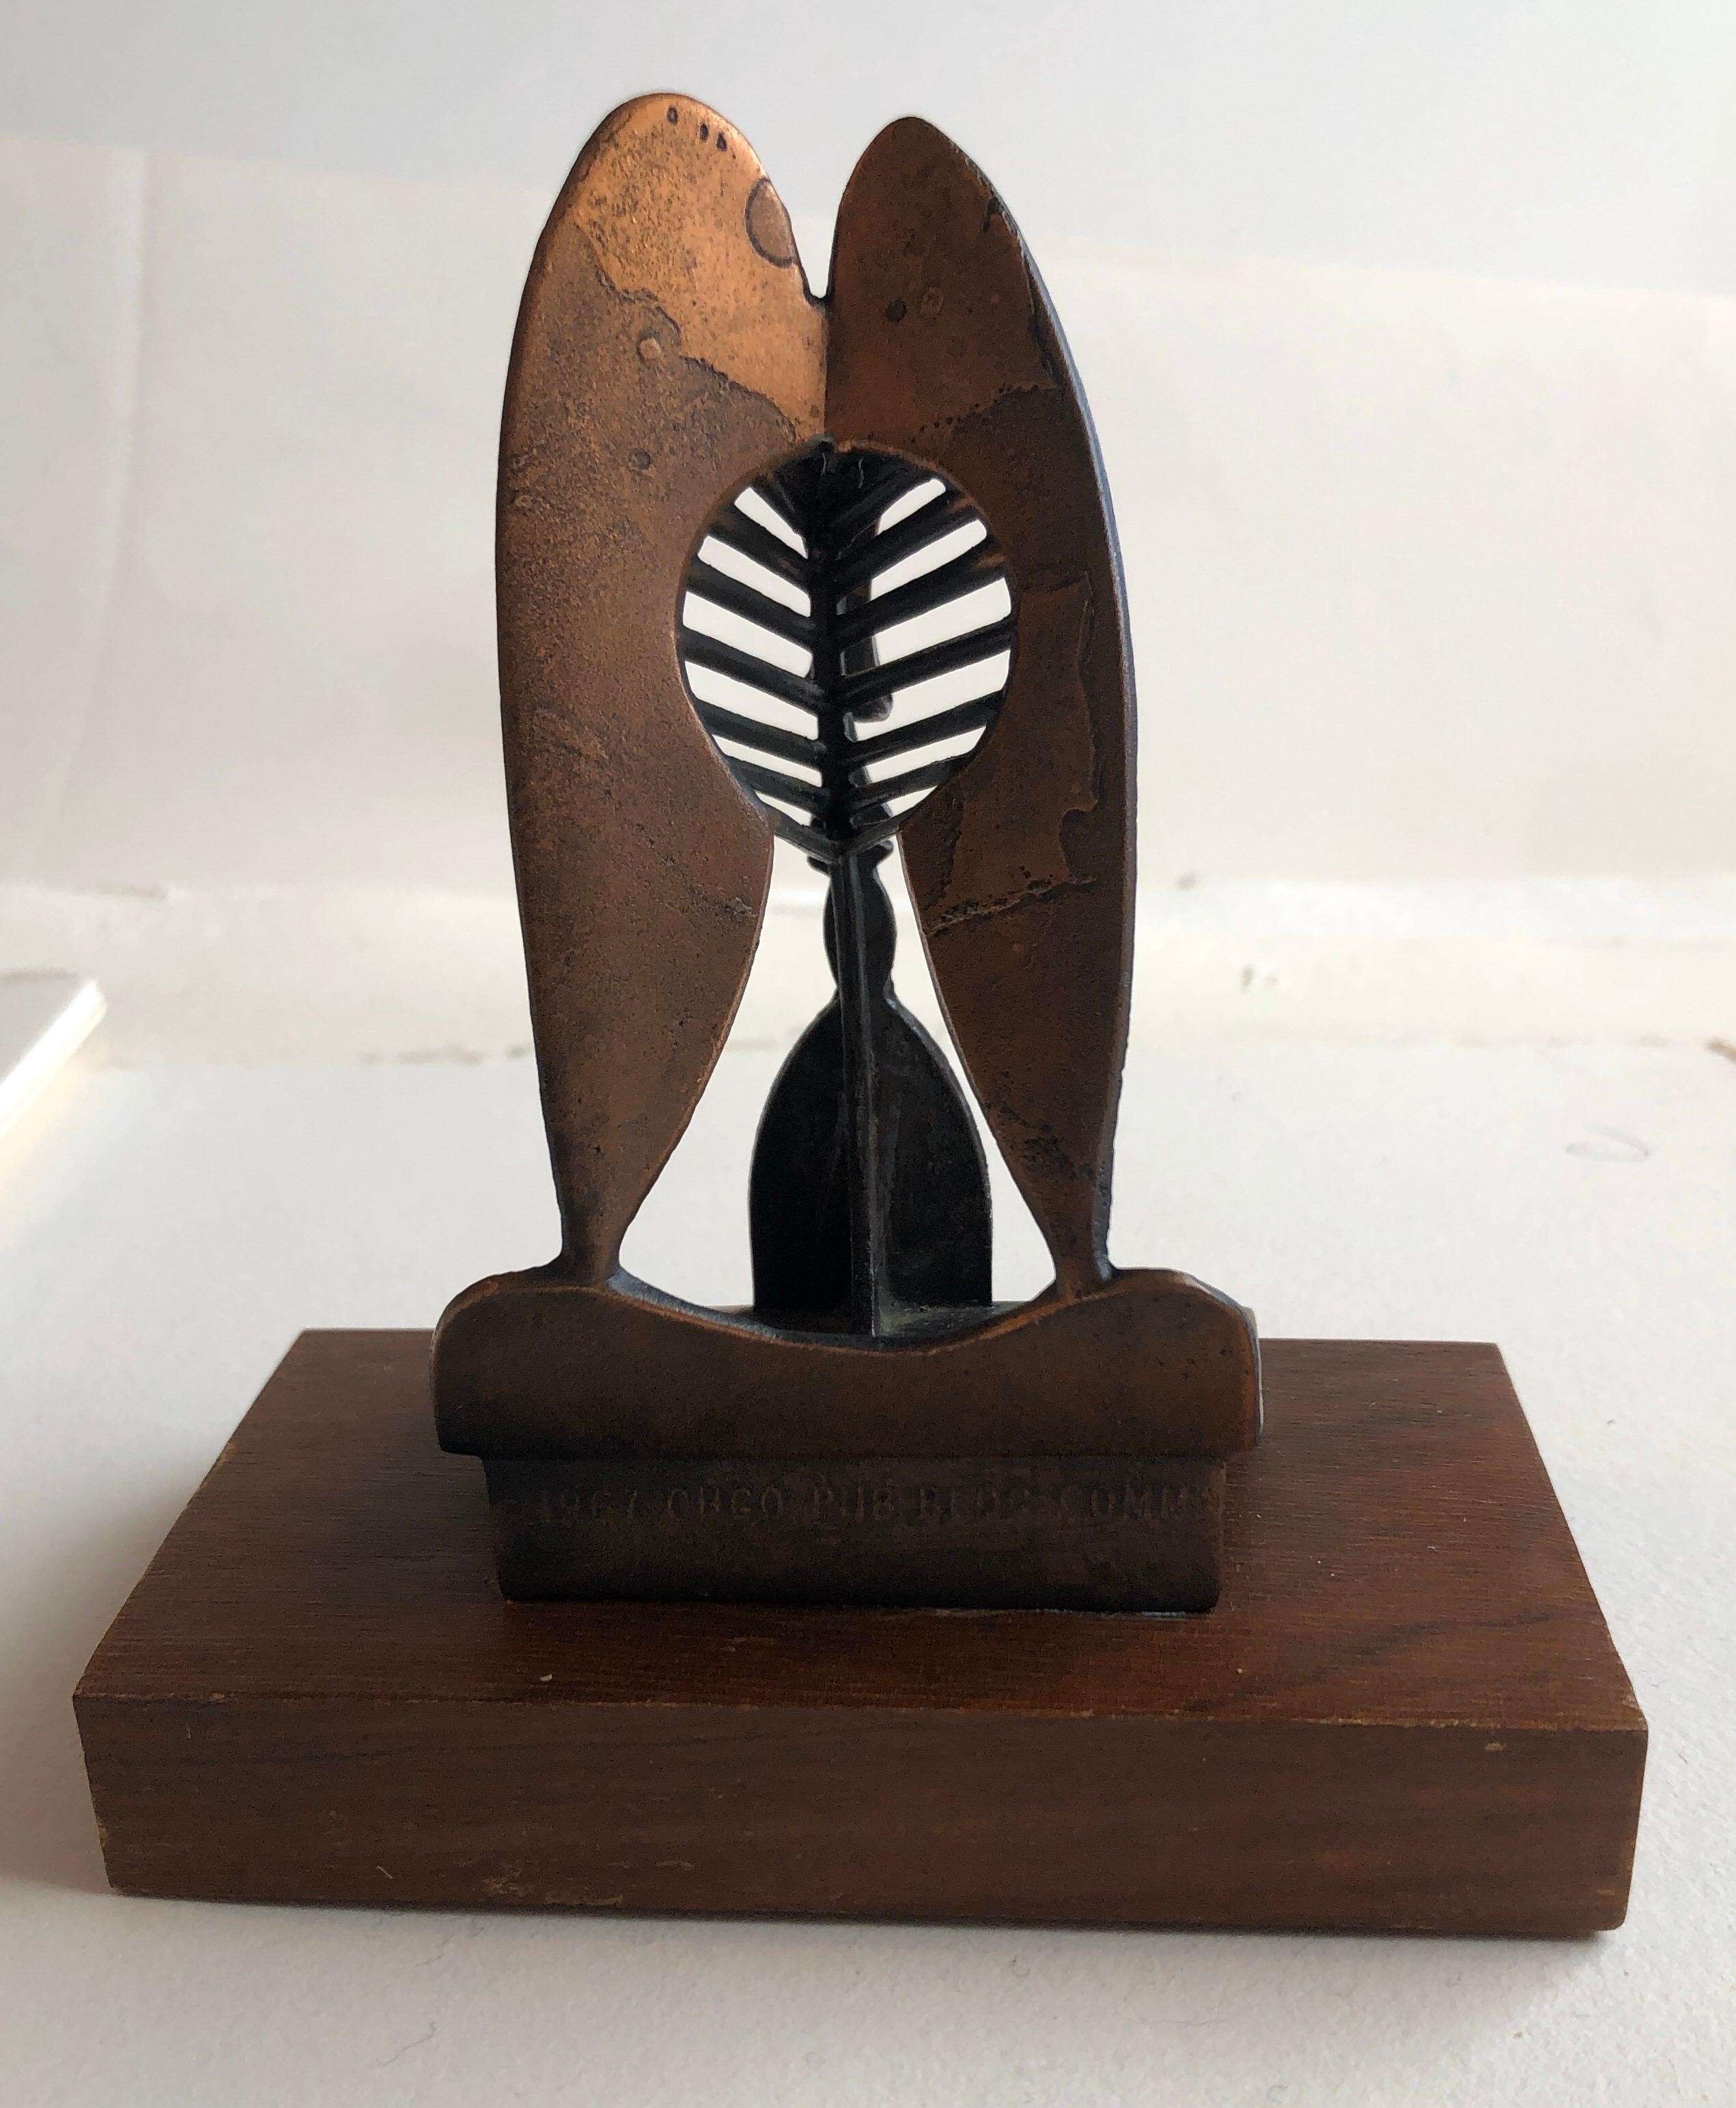 This is a model of the large Picasso sculpture in Chicago it is a vintage piece from 1967 and was made for the Chicago Public Building Commission (I believe by the Chicago replica co.)
there is a copper colored mottled patina to the piece. 

The